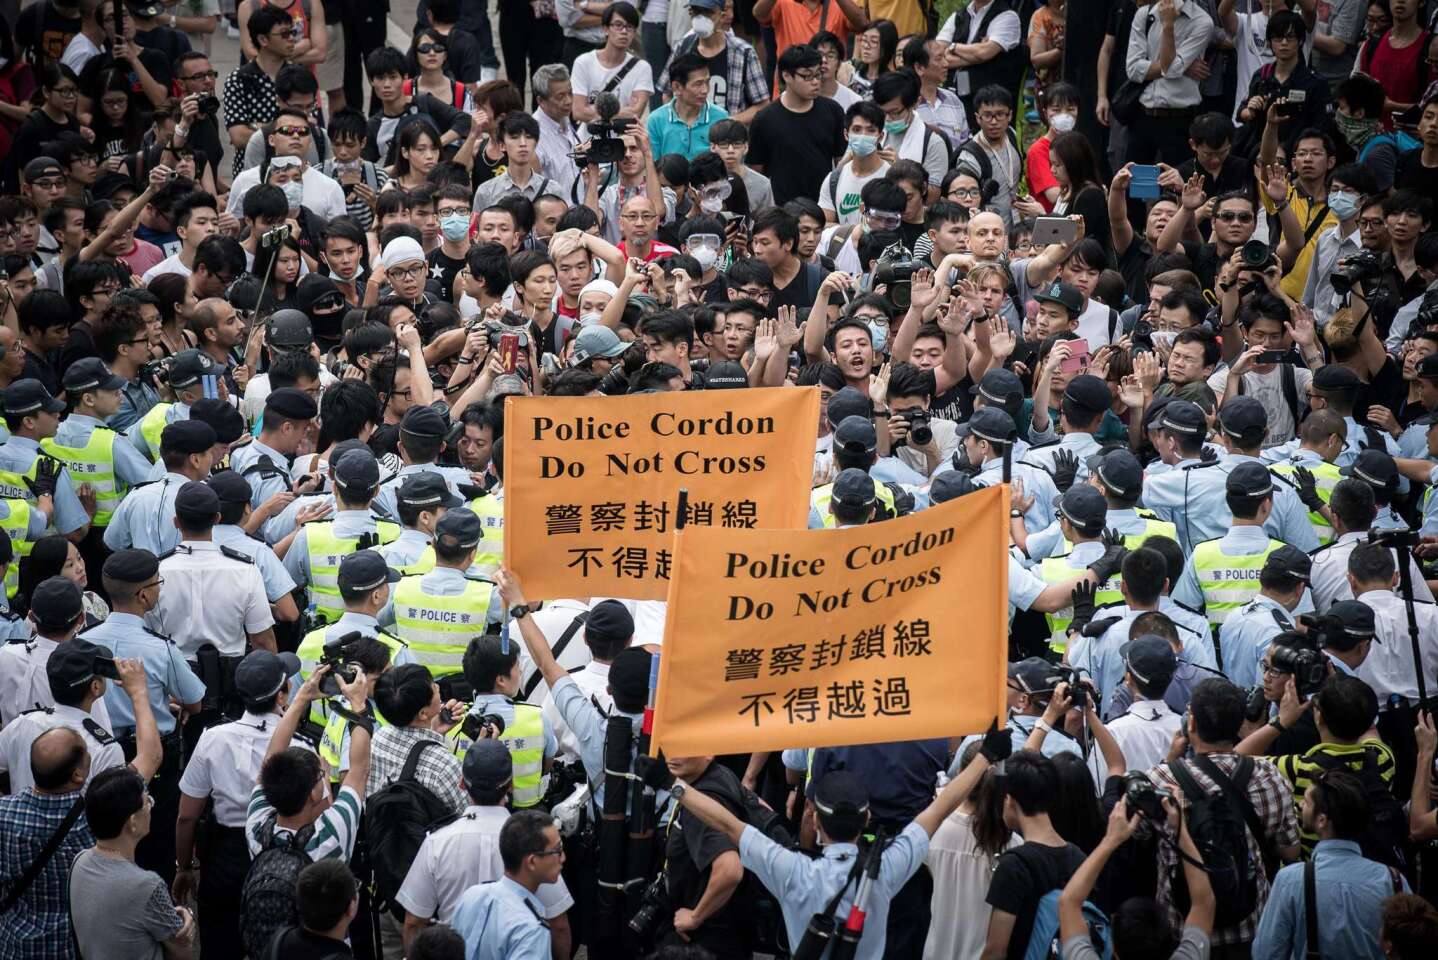 Police cordon an area where pro-democracy demonstrators confront those protesting them in the Admiralty district of Hong Kong on Oct. 13.